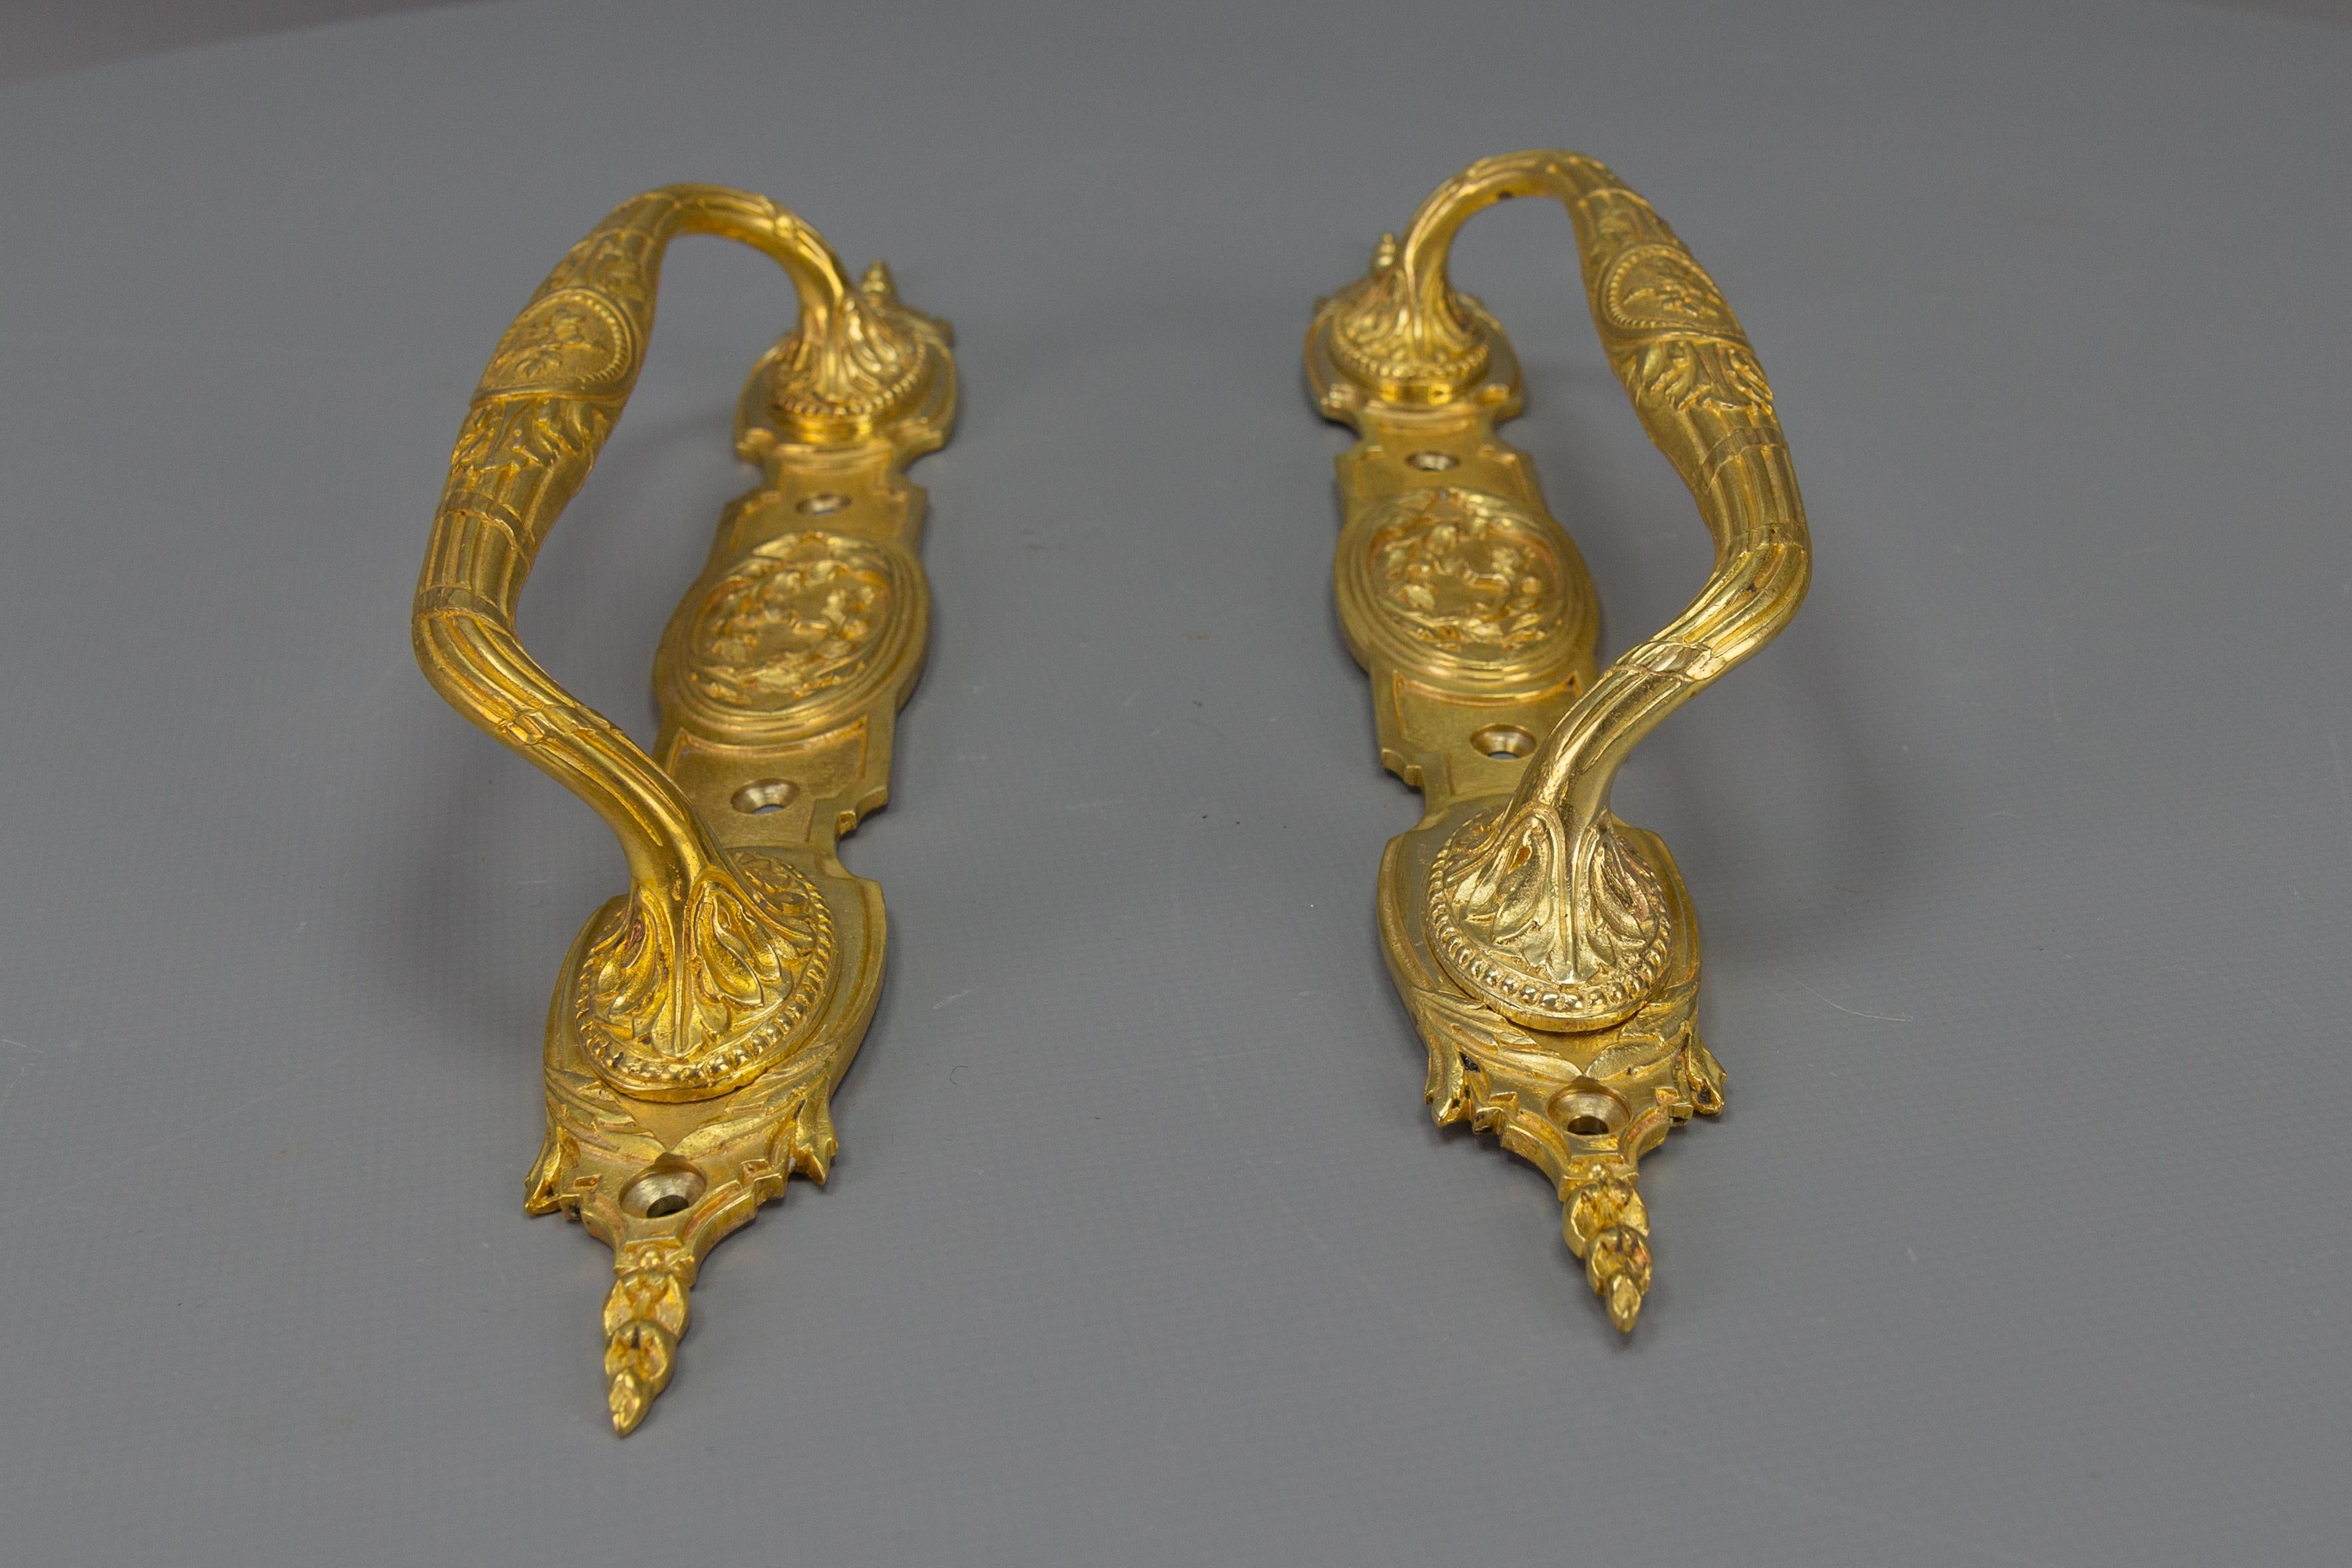 A pair of large antique Louis XVI-style bronze door handles, from the late 19th Century.
These impressive and large French Louis XVI-style bronze push-and-pull door handles are richly ornate with leaf and floral motifs.
There are two items in this